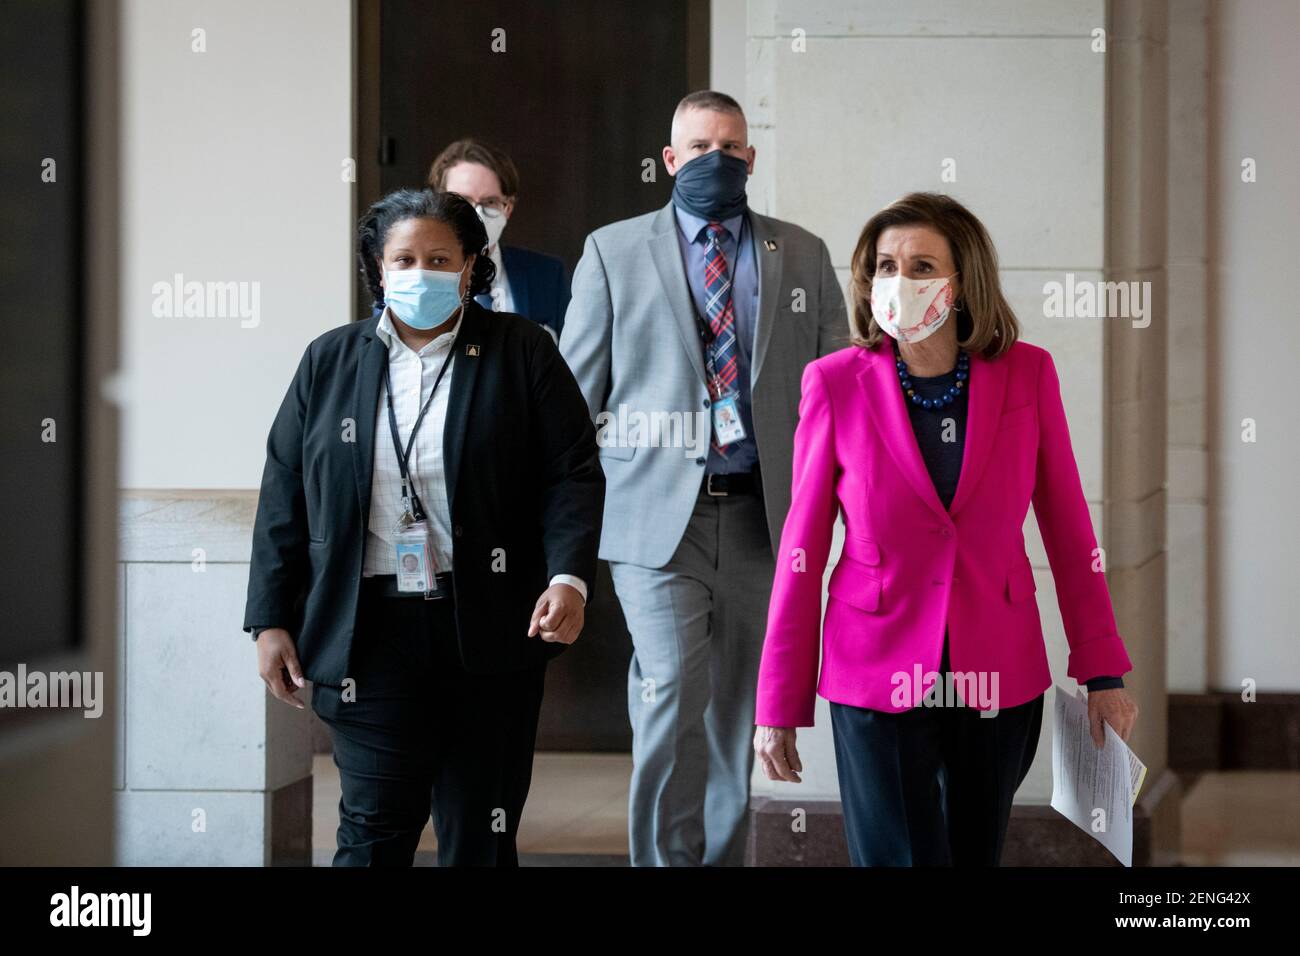 Speaker of the United States House of Representatives Nancy Pelosi (Democrat of California) arrives for her weekly press conference at the U.S. Capitol in Washington, DC, Thursday, February 25, 2021. Credit: Rod Lamkey / CNP /MediaPunch Stock Photo